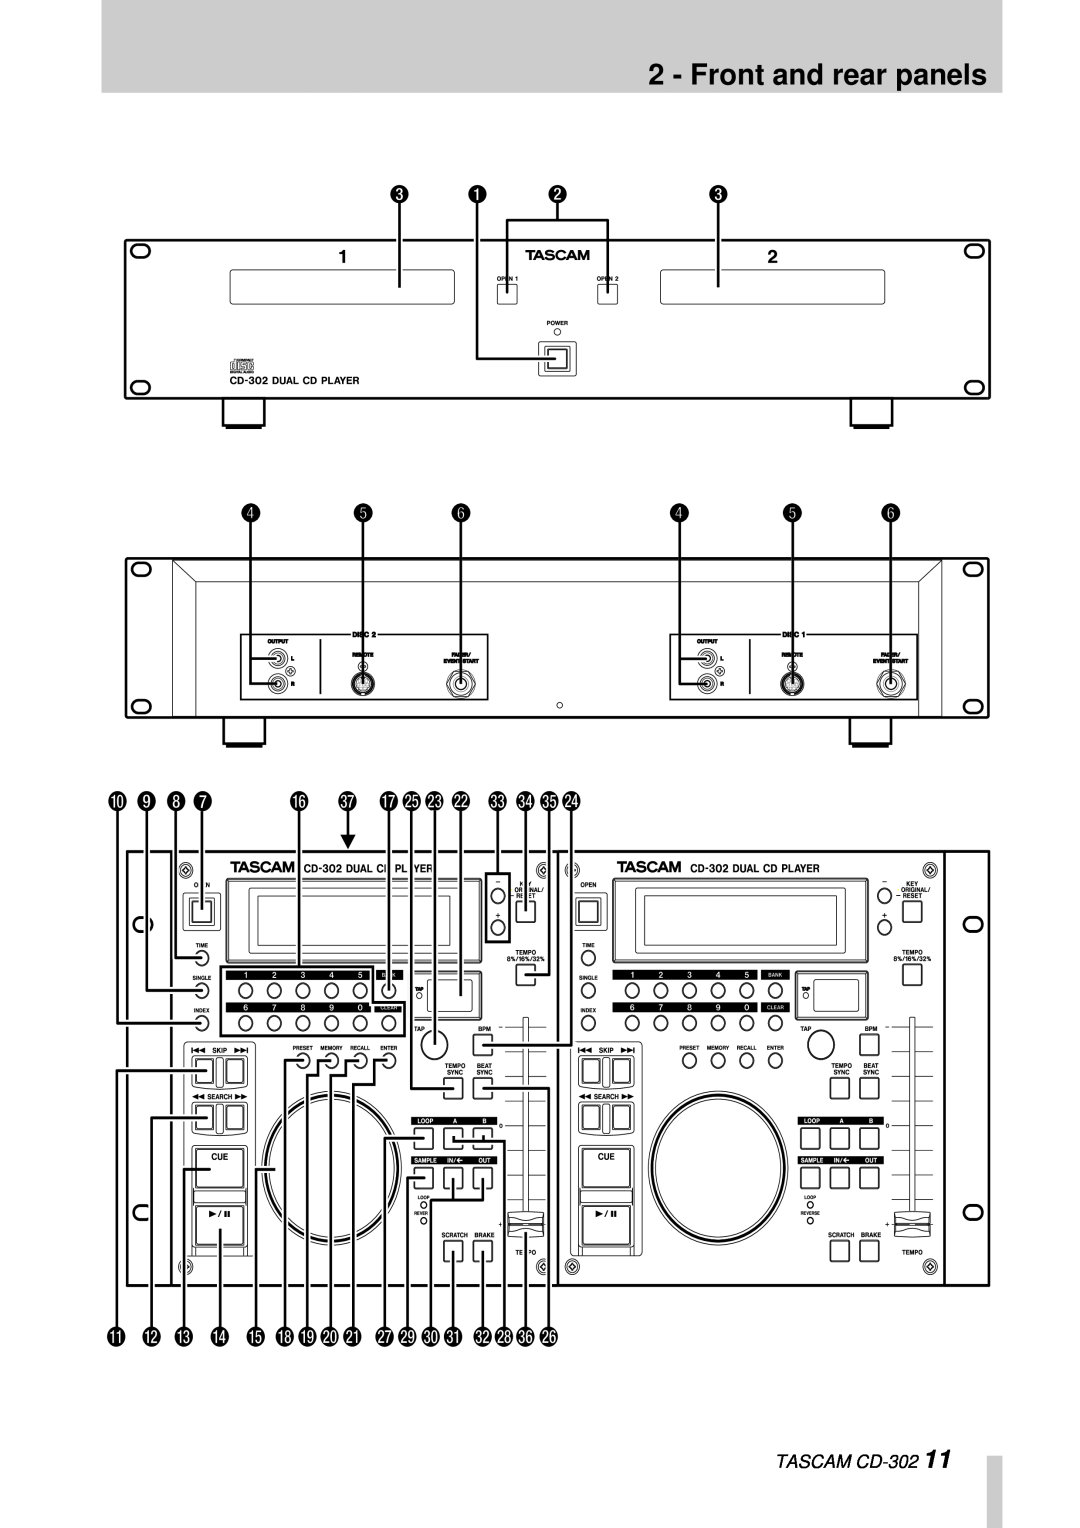 Tascam owner manual Front and rear panels, TASCAM CD-302 